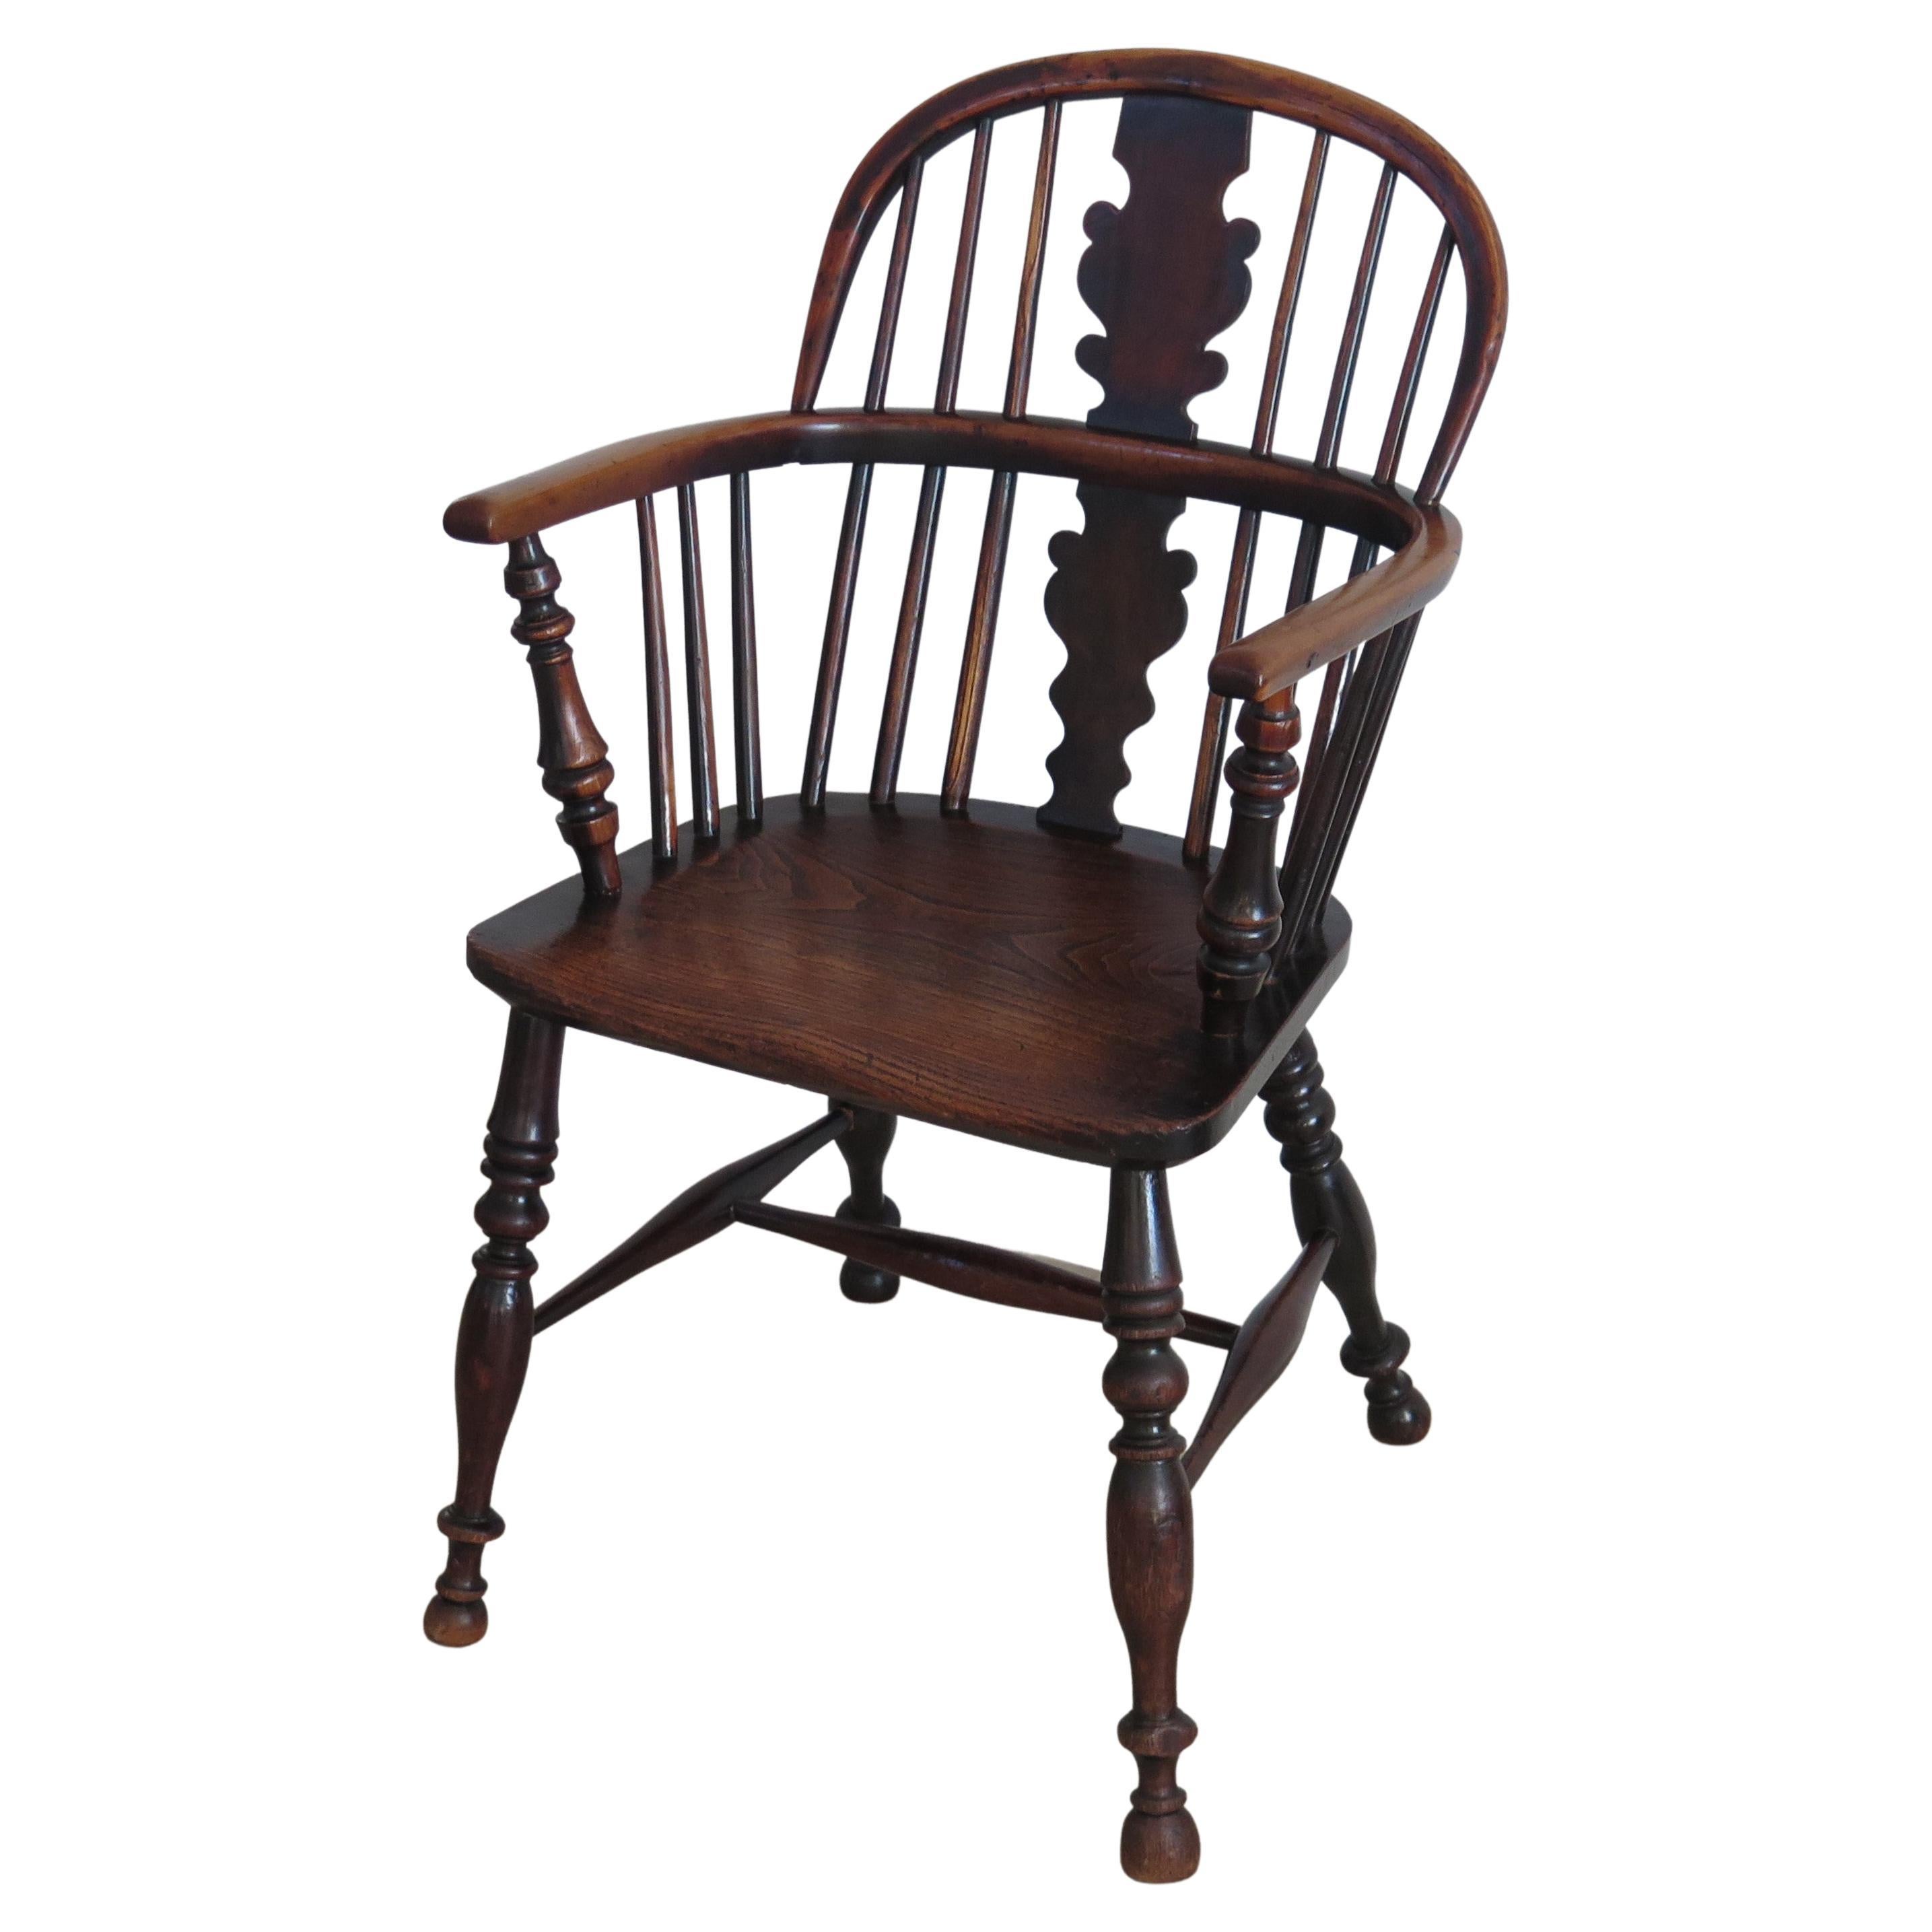 Yew Wood Low-Back Windsor Armchair, North East Yorkshire England, Circa 1850